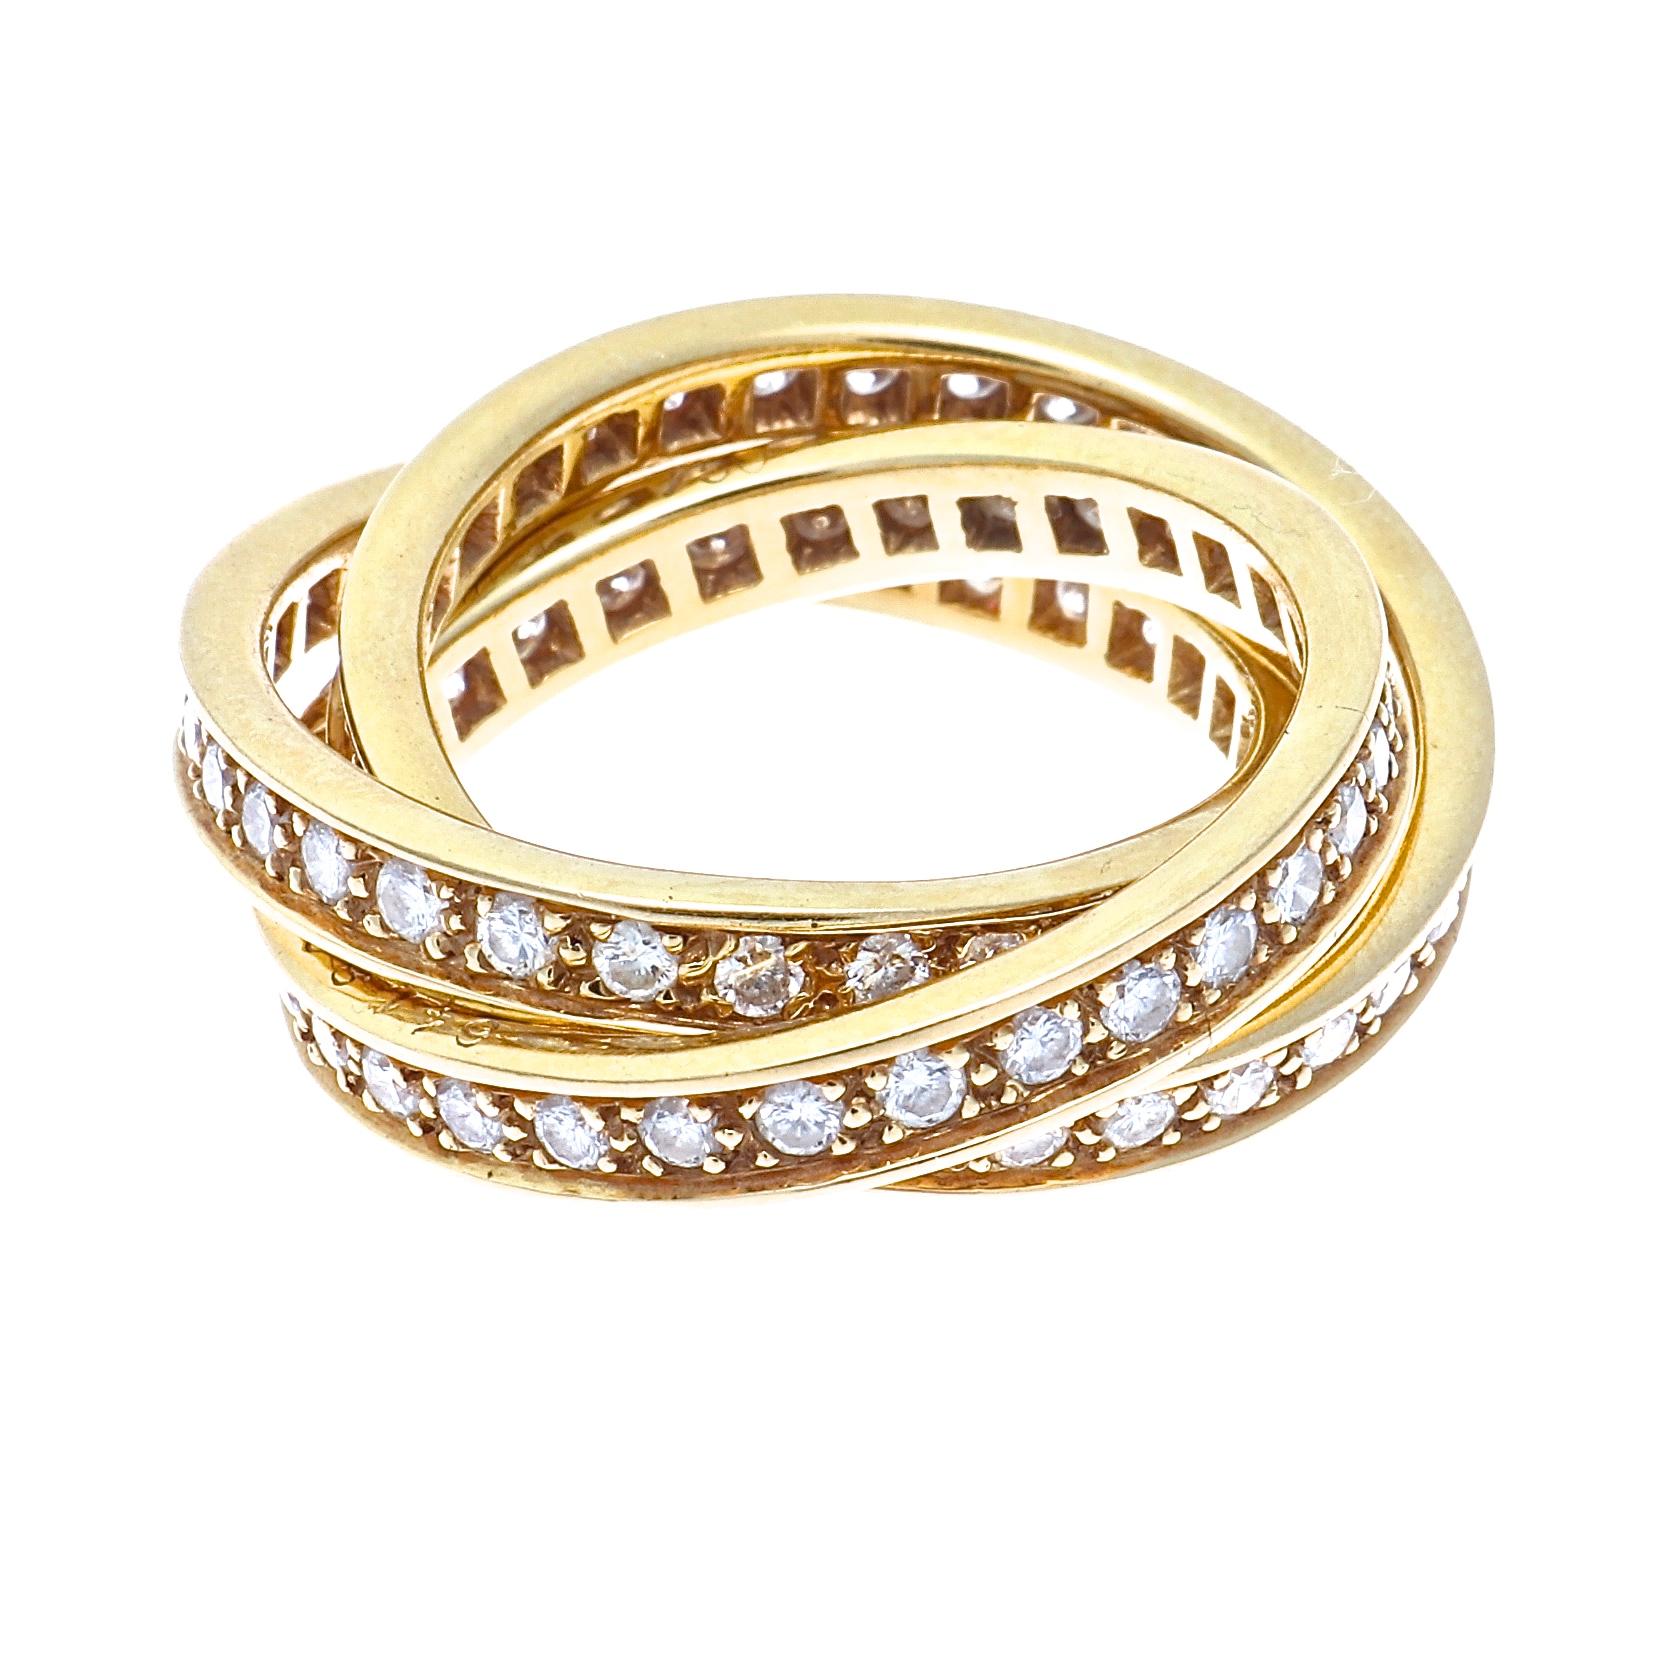 Cartier, elegant and timeless. A modern rendition of the trinity ring that has been part of the Cartier family since 1924. Featuring orbiting diamond gold eternity bands interlocking together with intrinsic meaning. Signed Cartier, numbered and